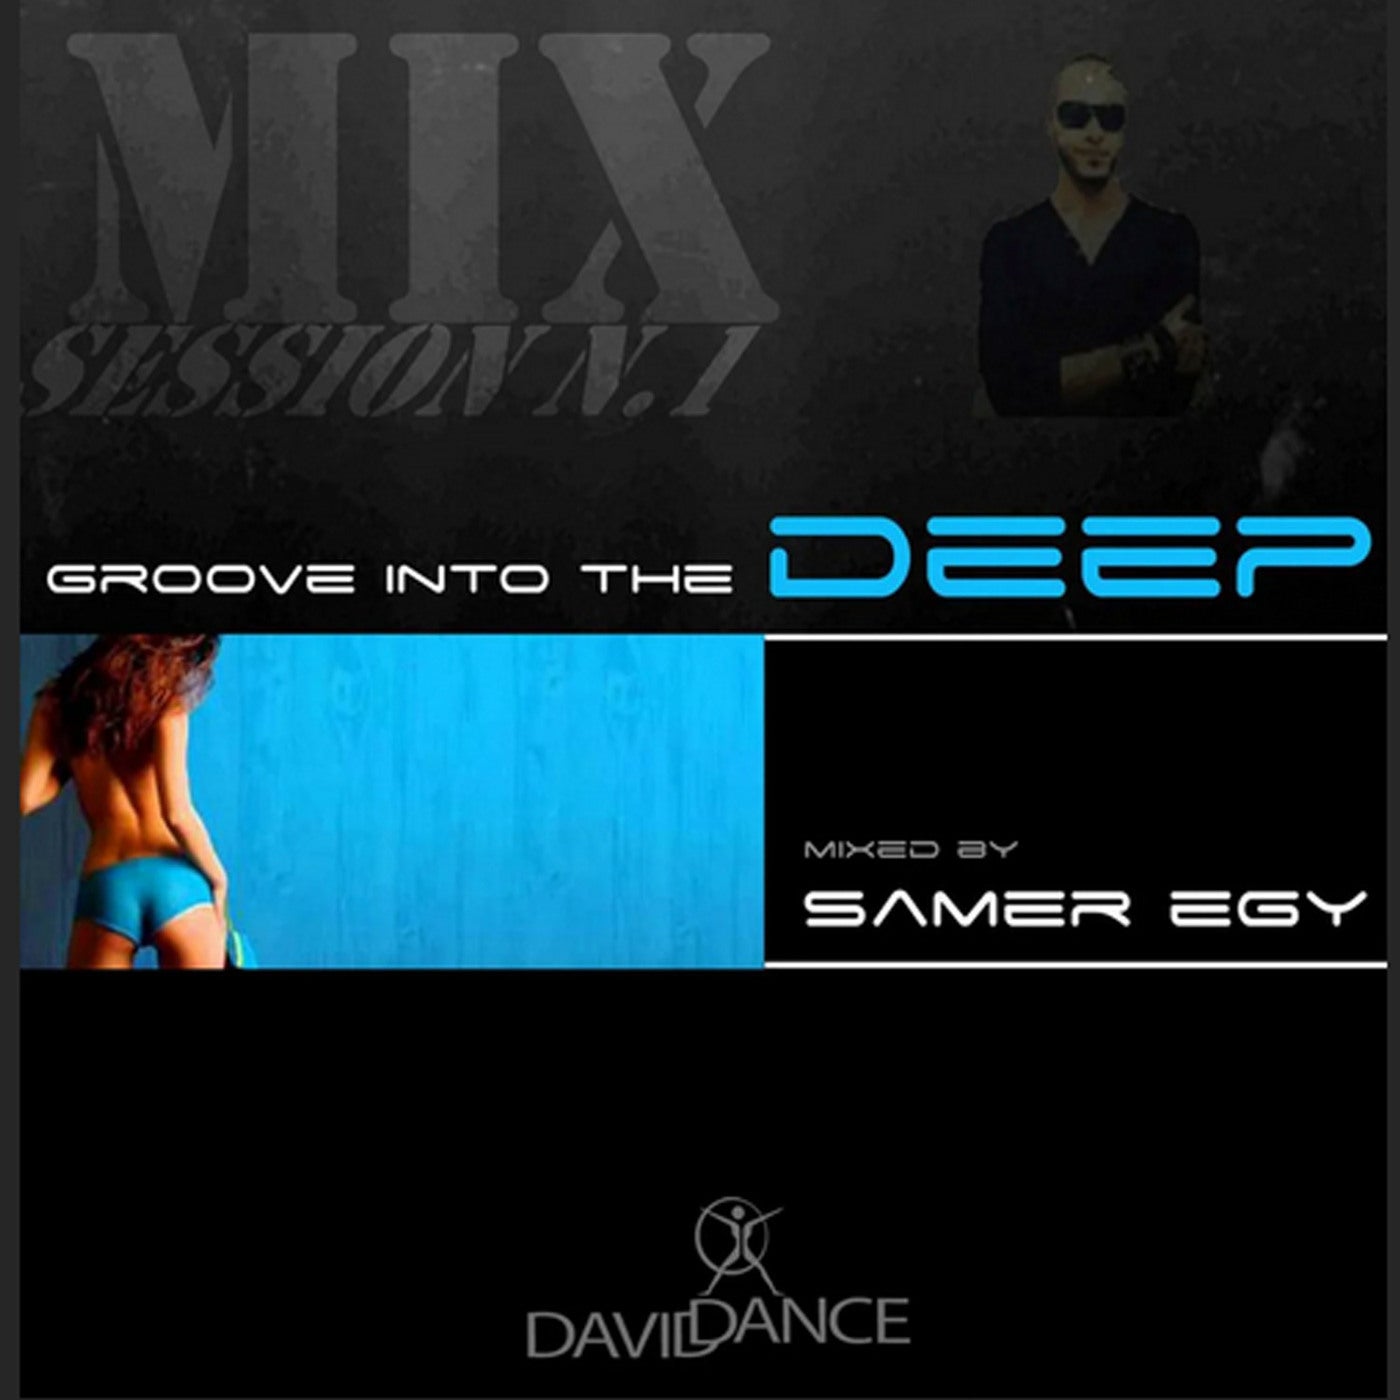 Groove into the deep session 1